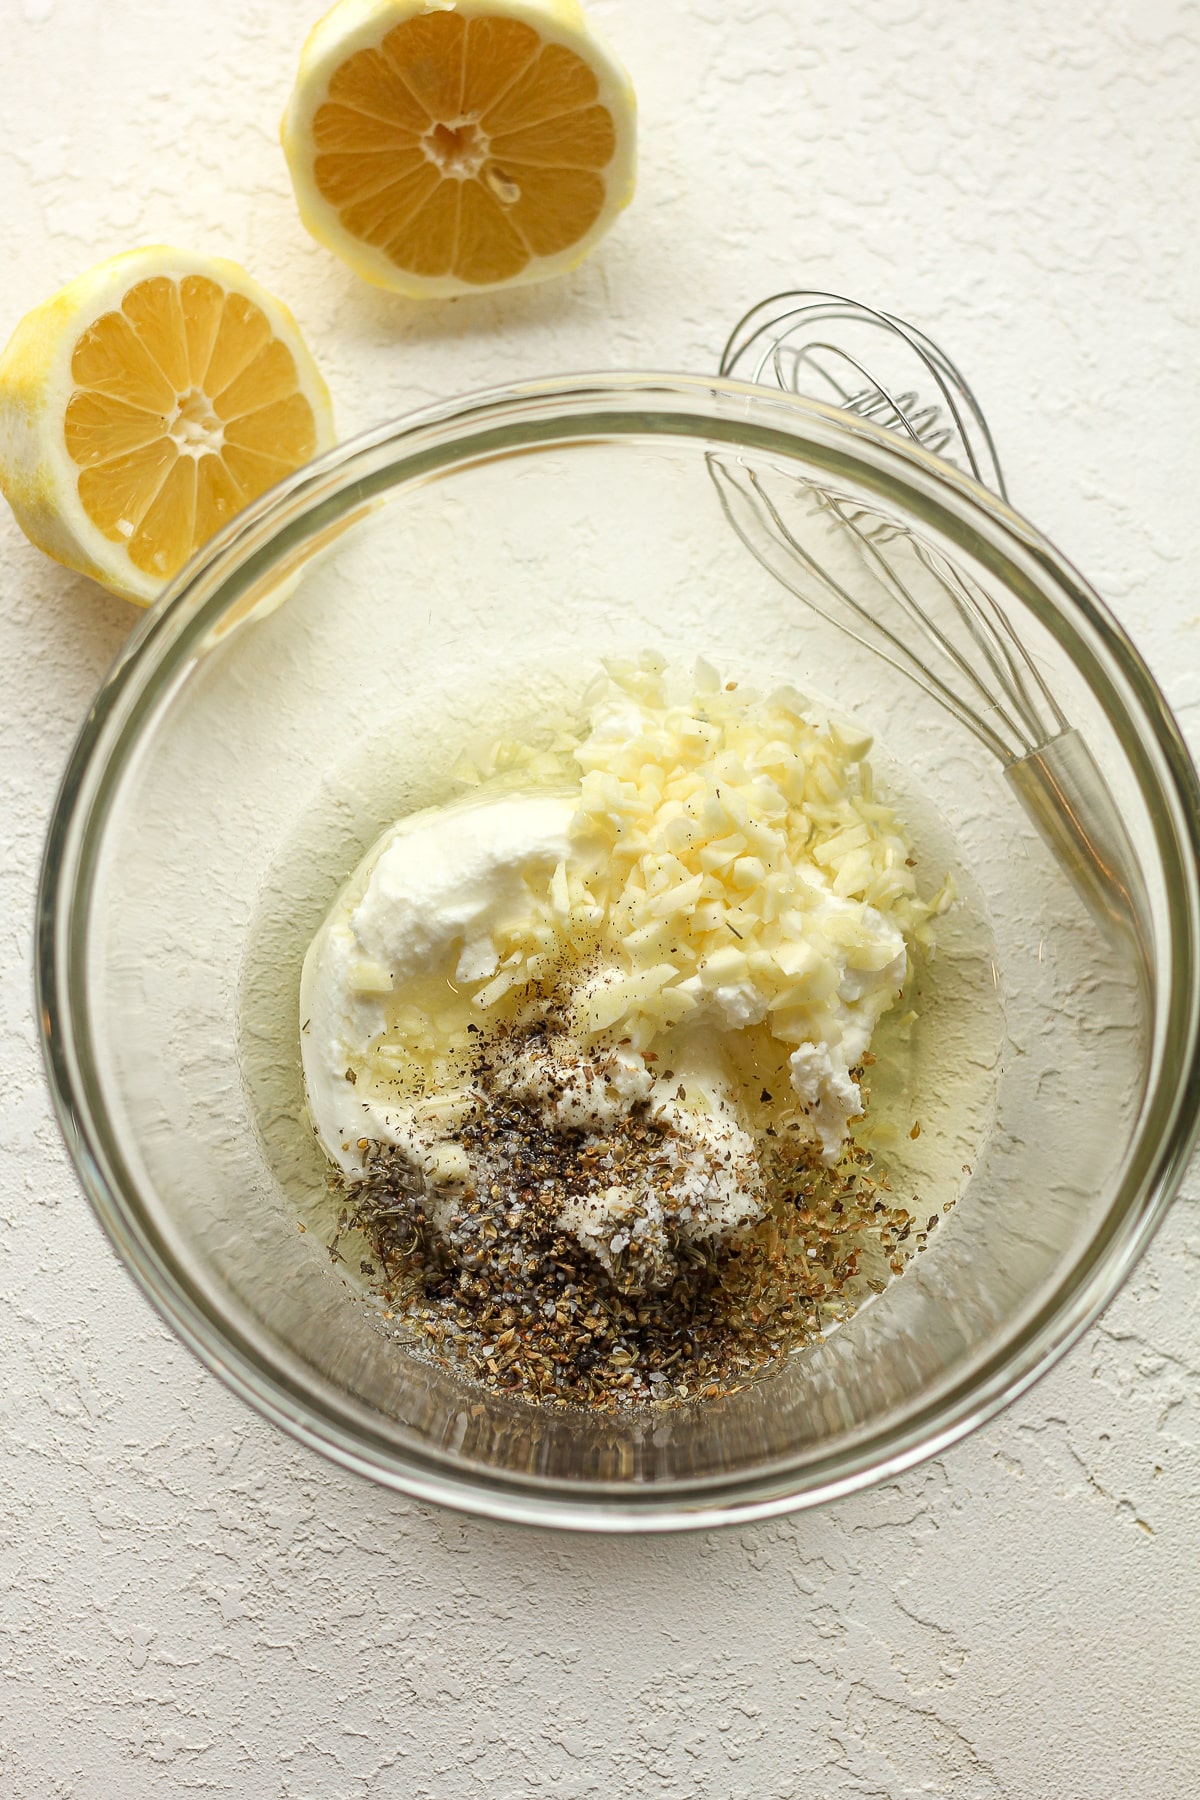 A bowl of the yogurt marinade with lemon halves next to the bowl.